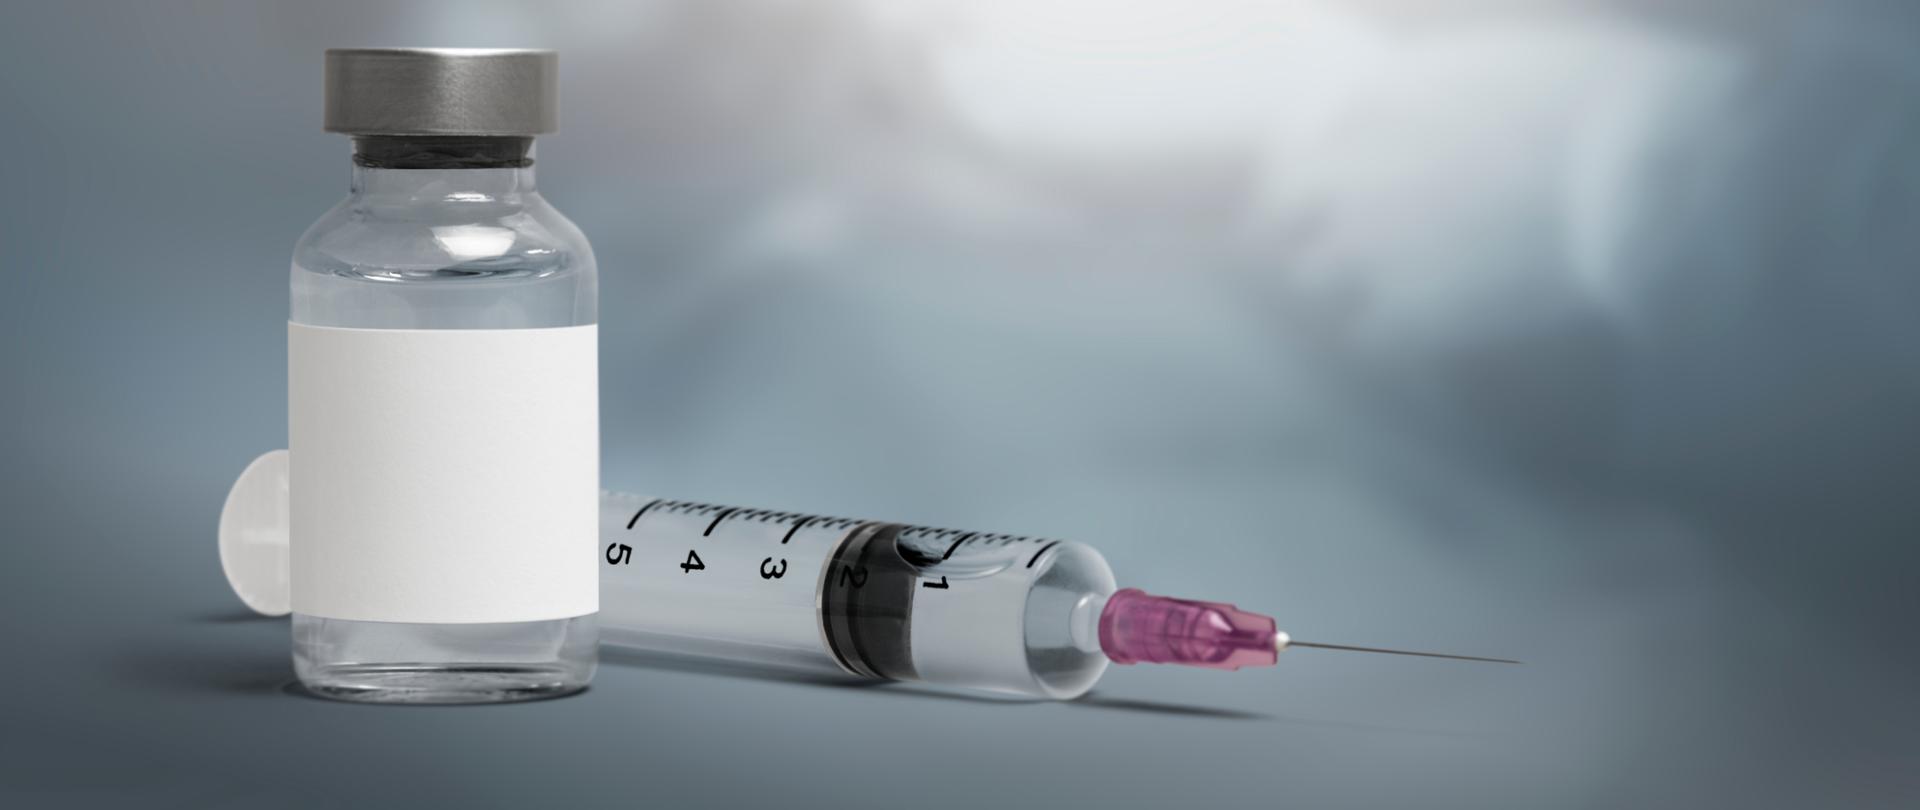 Vaccine vial with a needle syringe